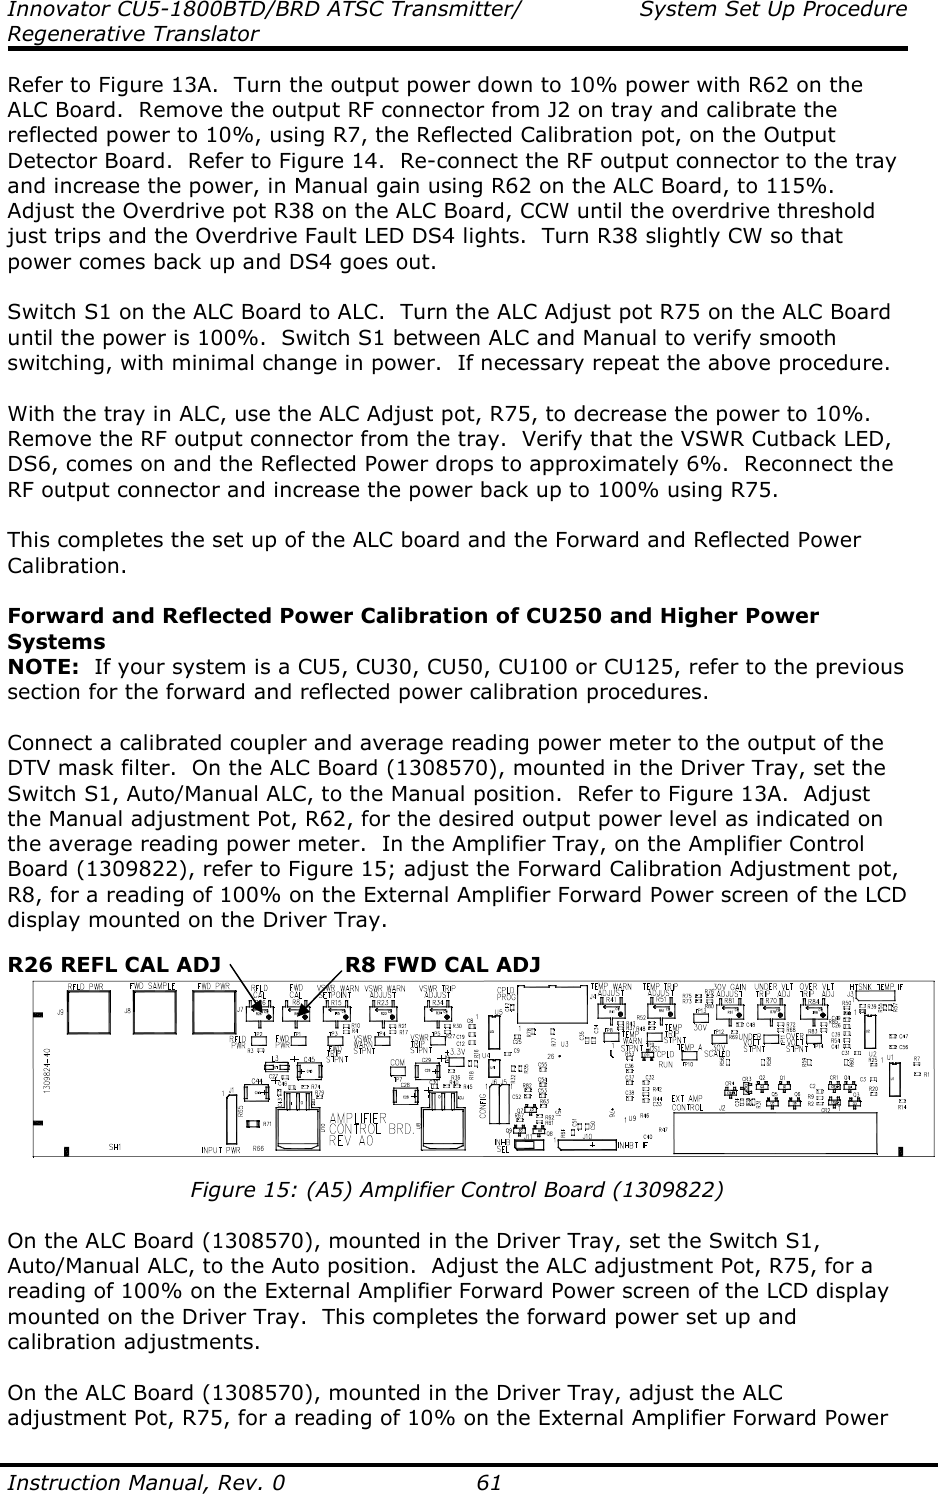 Innovator CU5-1800BTD/BRD ATSC Transmitter/  System Set Up Procedure Regenerative Translator  Instruction Manual, Rev. 0    61 Refer to Figure 13A.  Turn the output power down to 10% power with R62 on the ALC Board.  Remove the output RF connector from J2 on tray and calibrate the reflected power to 10%, using R7, the Reflected Calibration pot, on the Output Detector Board.  Refer to Figure 14.  Re-connect the RF output connector to the tray and increase the power, in Manual gain using R62 on the ALC Board, to 115%.  Adjust the Overdrive pot R38 on the ALC Board, CCW until the overdrive threshold just trips and the Overdrive Fault LED DS4 lights.  Turn R38 slightly CW so that power comes back up and DS4 goes out.   Switch S1 on the ALC Board to ALC.  Turn the ALC Adjust pot R75 on the ALC Board until the power is 100%.  Switch S1 between ALC and Manual to verify smooth switching, with minimal change in power.  If necessary repeat the above procedure.  With the tray in ALC, use the ALC Adjust pot, R75, to decrease the power to 10%.  Remove the RF output connector from the tray.  Verify that the VSWR Cutback LED, DS6, comes on and the Reflected Power drops to approximately 6%.  Reconnect the RF output connector and increase the power back up to 100% using R75.  This completes the set up of the ALC board and the Forward and Reflected Power Calibration.  Forward and Reflected Power Calibration of CU250 and Higher Power Systems NOTE:  If your system is a CU5, CU30, CU50, CU100 or CU125, refer to the previous section for the forward and reflected power calibration procedures.  Connect a calibrated coupler and average reading power meter to the output of the DTV mask filter.  On the ALC Board (1308570), mounted in the Driver Tray, set the Switch S1, Auto/Manual ALC, to the Manual position.  Refer to Figure 13A.  Adjust the Manual adjustment Pot, R62, for the desired output power level as indicated on the average reading power meter.  In the Amplifier Tray, on the Amplifier Control Board (1309822), refer to Figure 15; adjust the Forward Calibration Adjustment pot, R8, for a reading of 100% on the External Amplifier Forward Power screen of the LCD display mounted on the Driver Tray.   Figure 15: (A5) Amplifier Control Board (1309822)  On the ALC Board (1308570), mounted in the Driver Tray, set the Switch S1, Auto/Manual ALC, to the Auto position.  Adjust the ALC adjustment Pot, R75, for a reading of 100% on the External Amplifier Forward Power screen of the LCD display mounted on the Driver Tray.  This completes the forward power set up and calibration adjustments.  On the ALC Board (1308570), mounted in the Driver Tray, adjust the ALC adjustment Pot, R75, for a reading of 10% on the External Amplifier Forward Power R8 FWD CAL ADJ R26 REFL CAL ADJ 